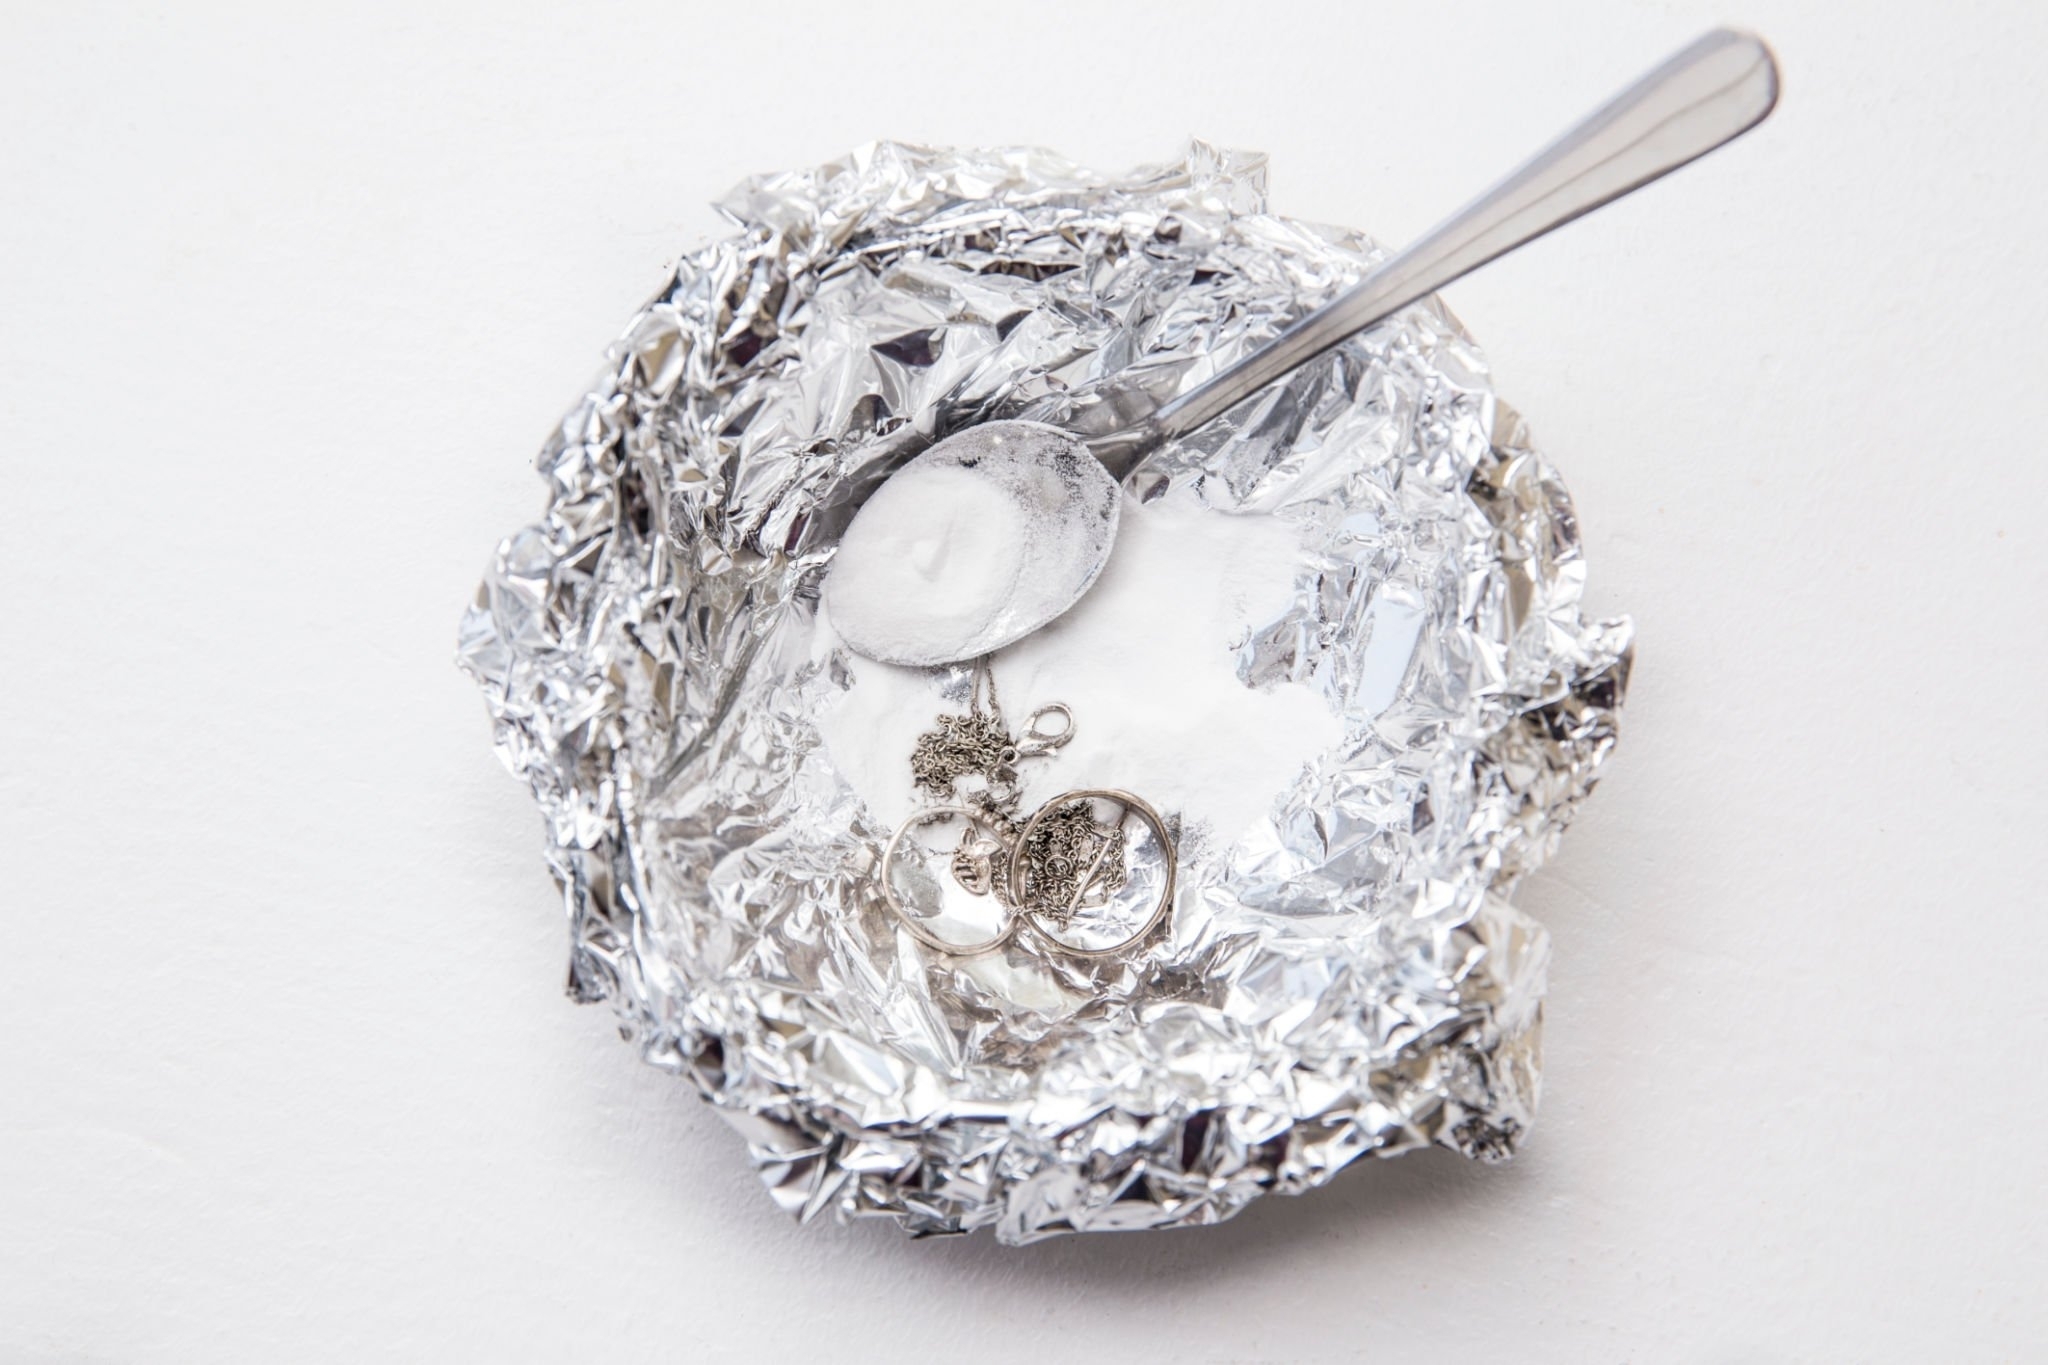 A solution of baking soda and warm water will remove the tarnish from silver